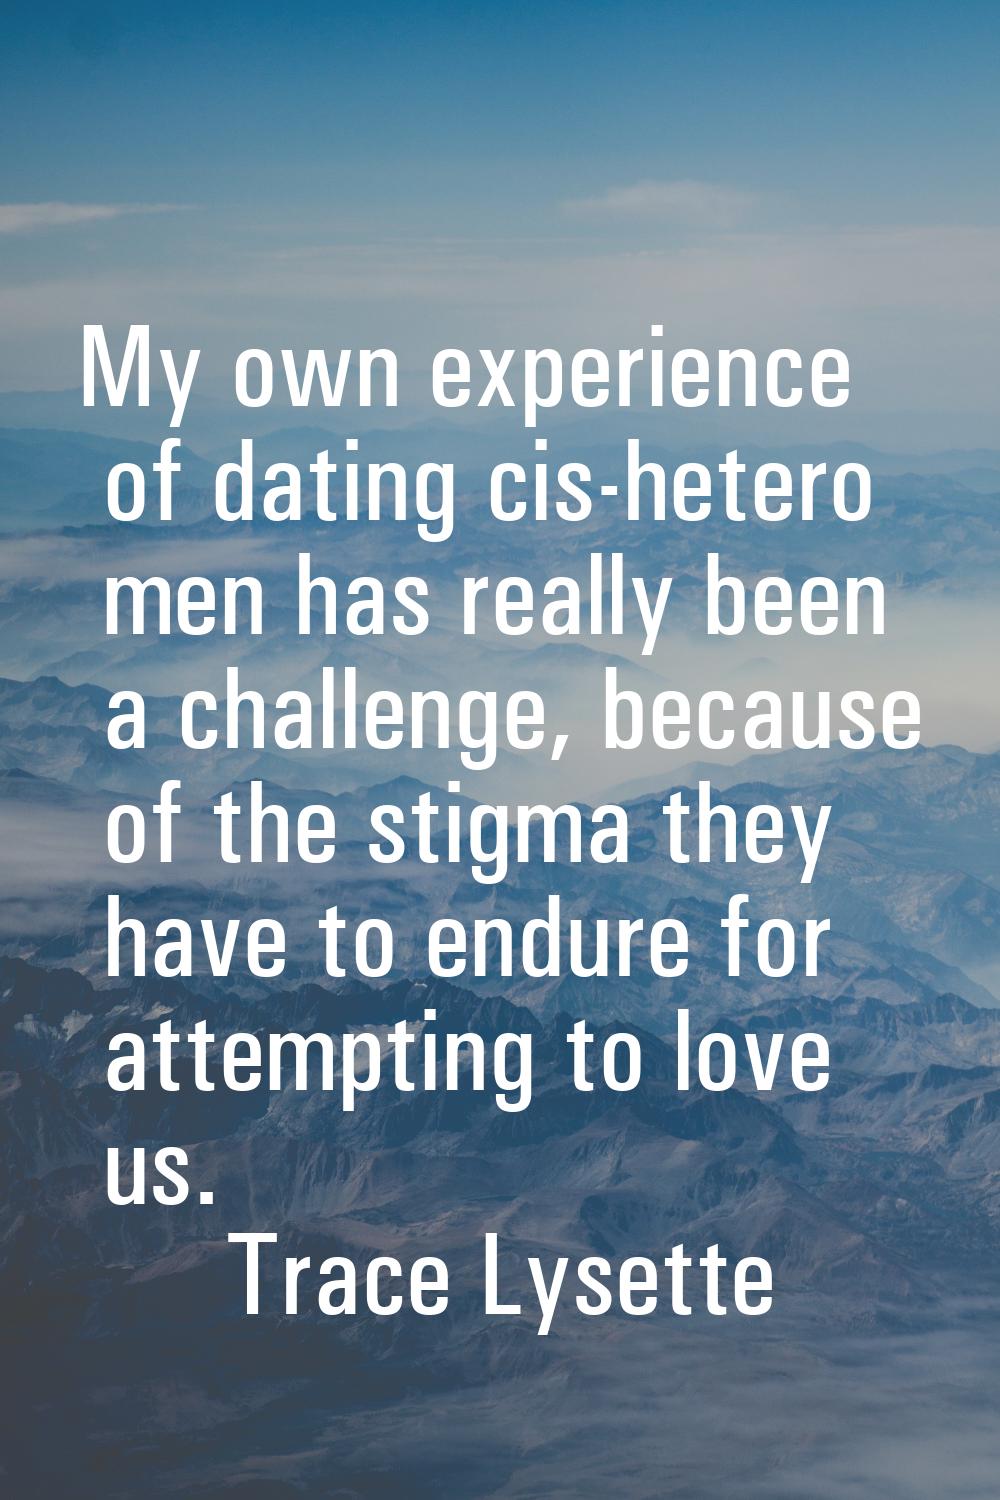 My own experience of dating cis-hetero men has really been a challenge, because of the stigma they 